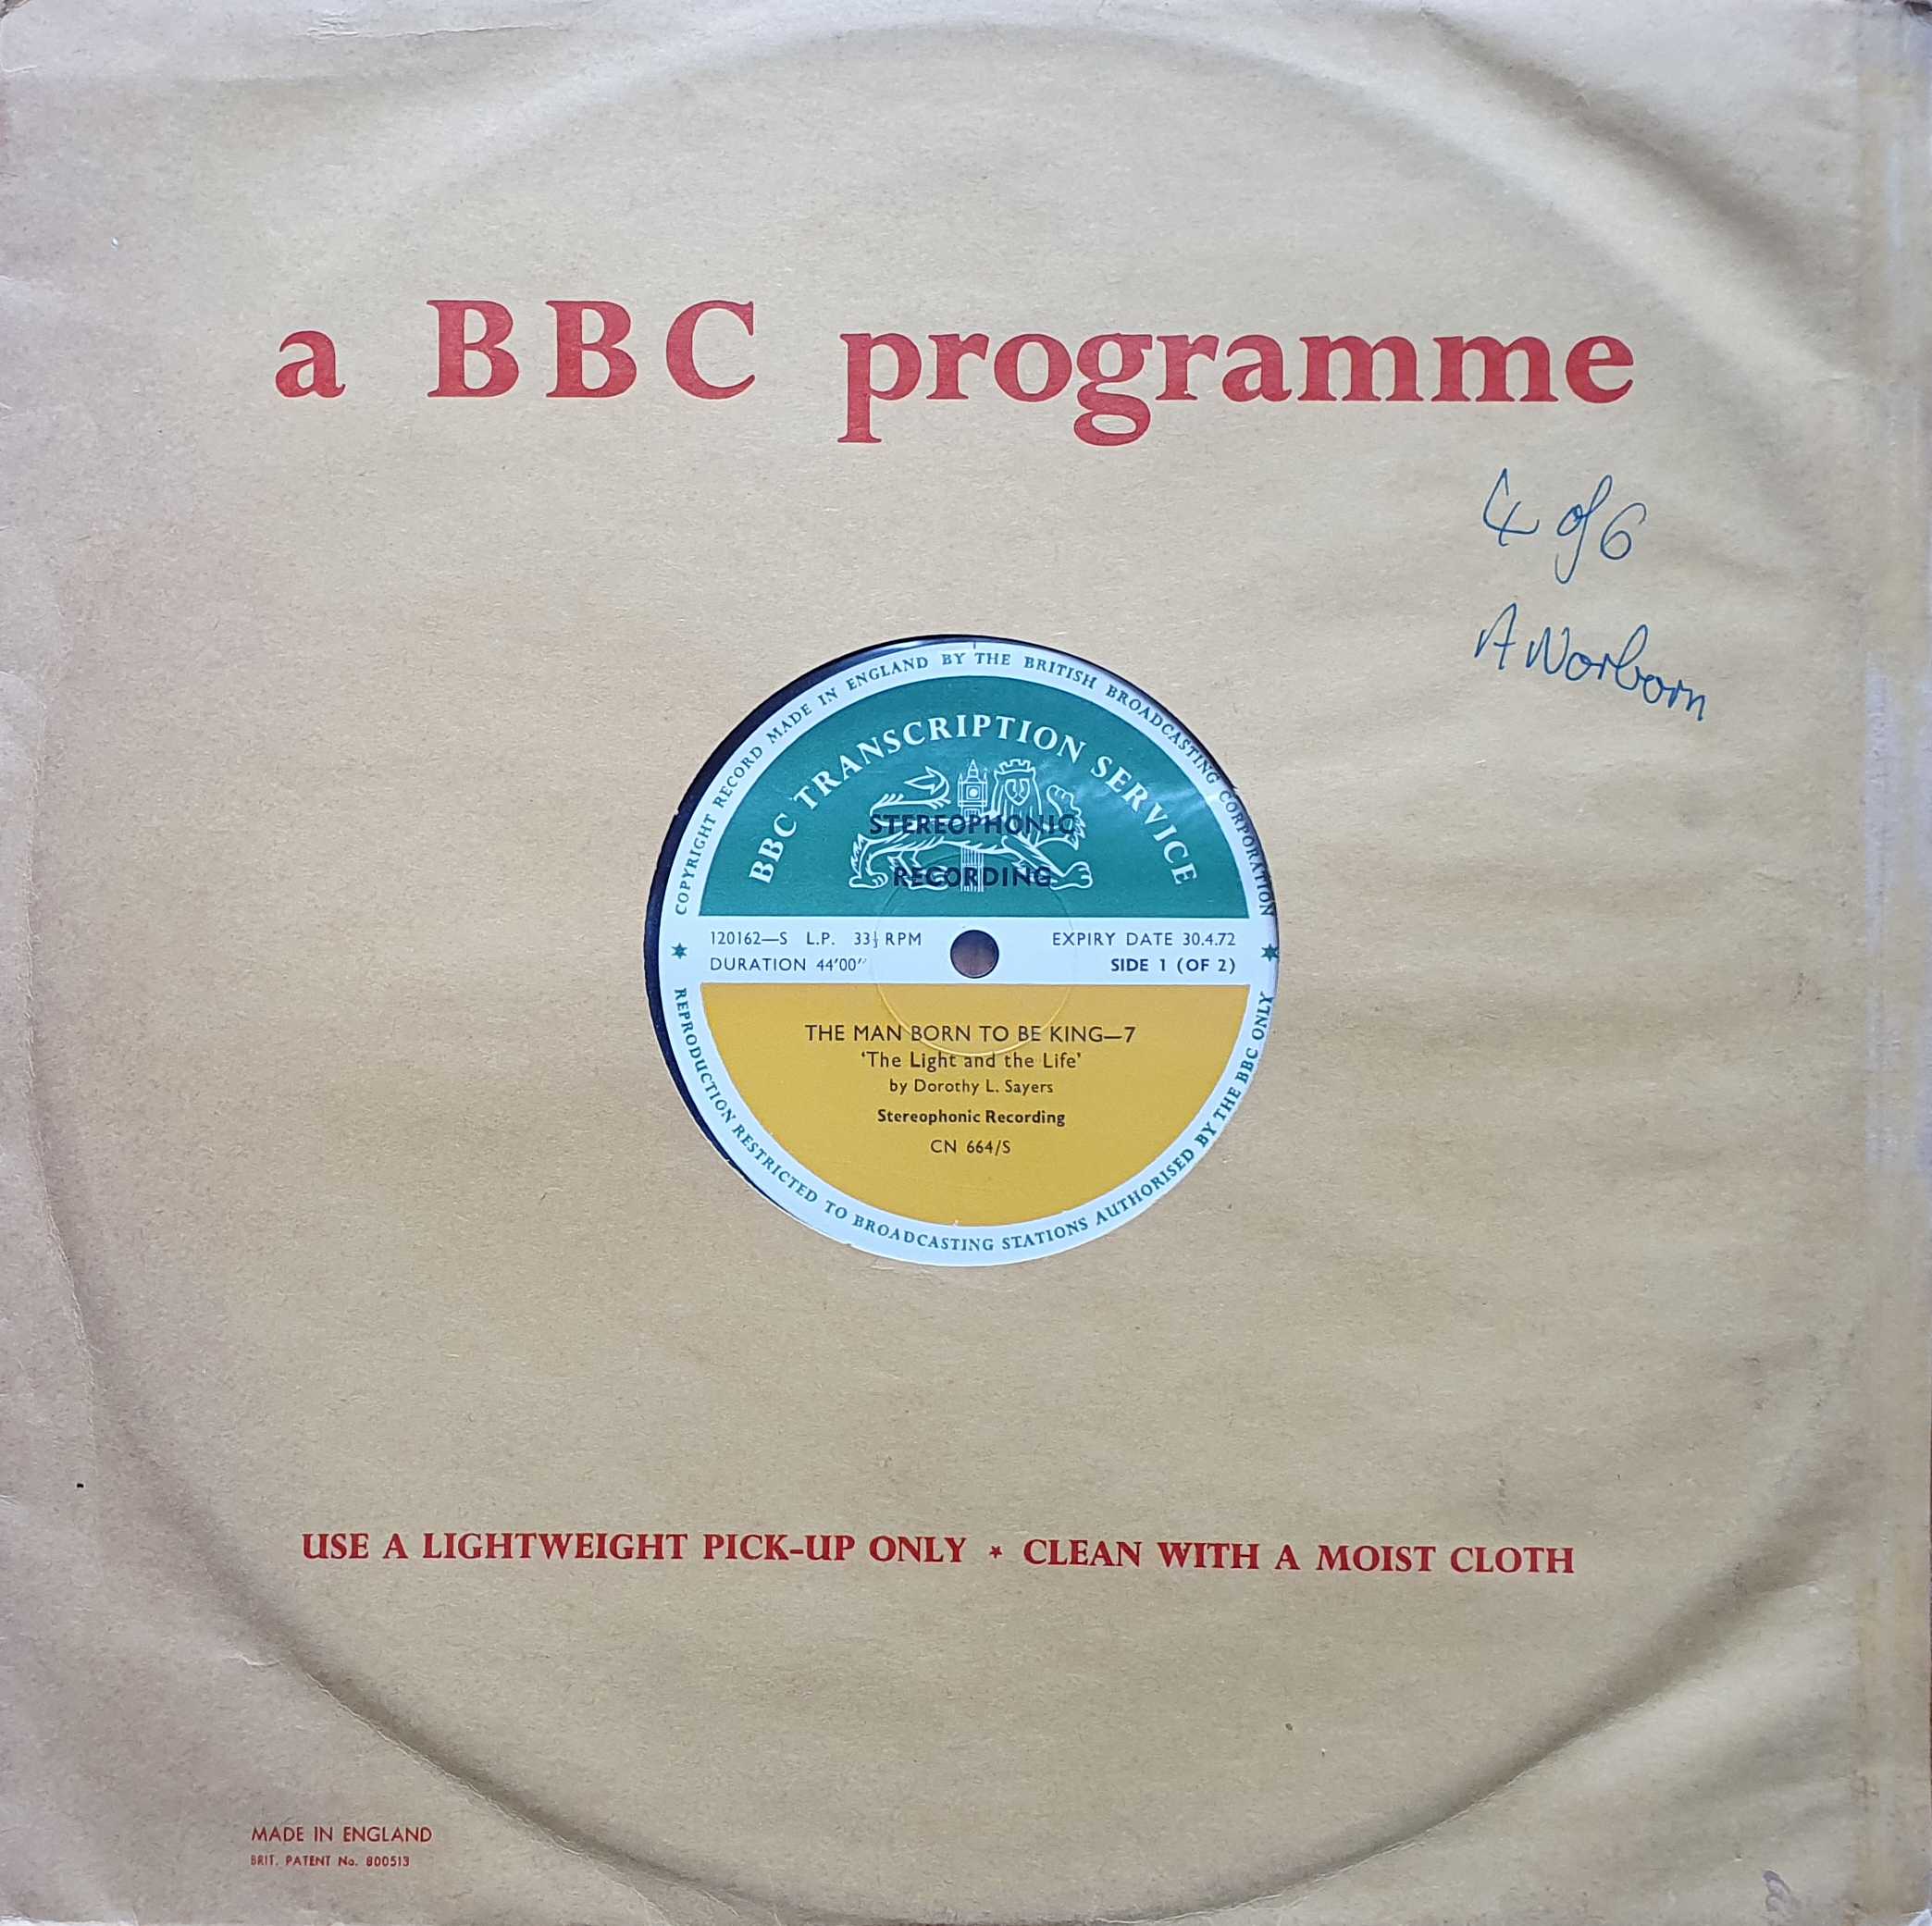 Picture of CN 664 S 7 The man born to be king 7 & 8 (Sides 1 only) by artist Dorothy L. Sayers from the BBC albums - Records and Tapes library